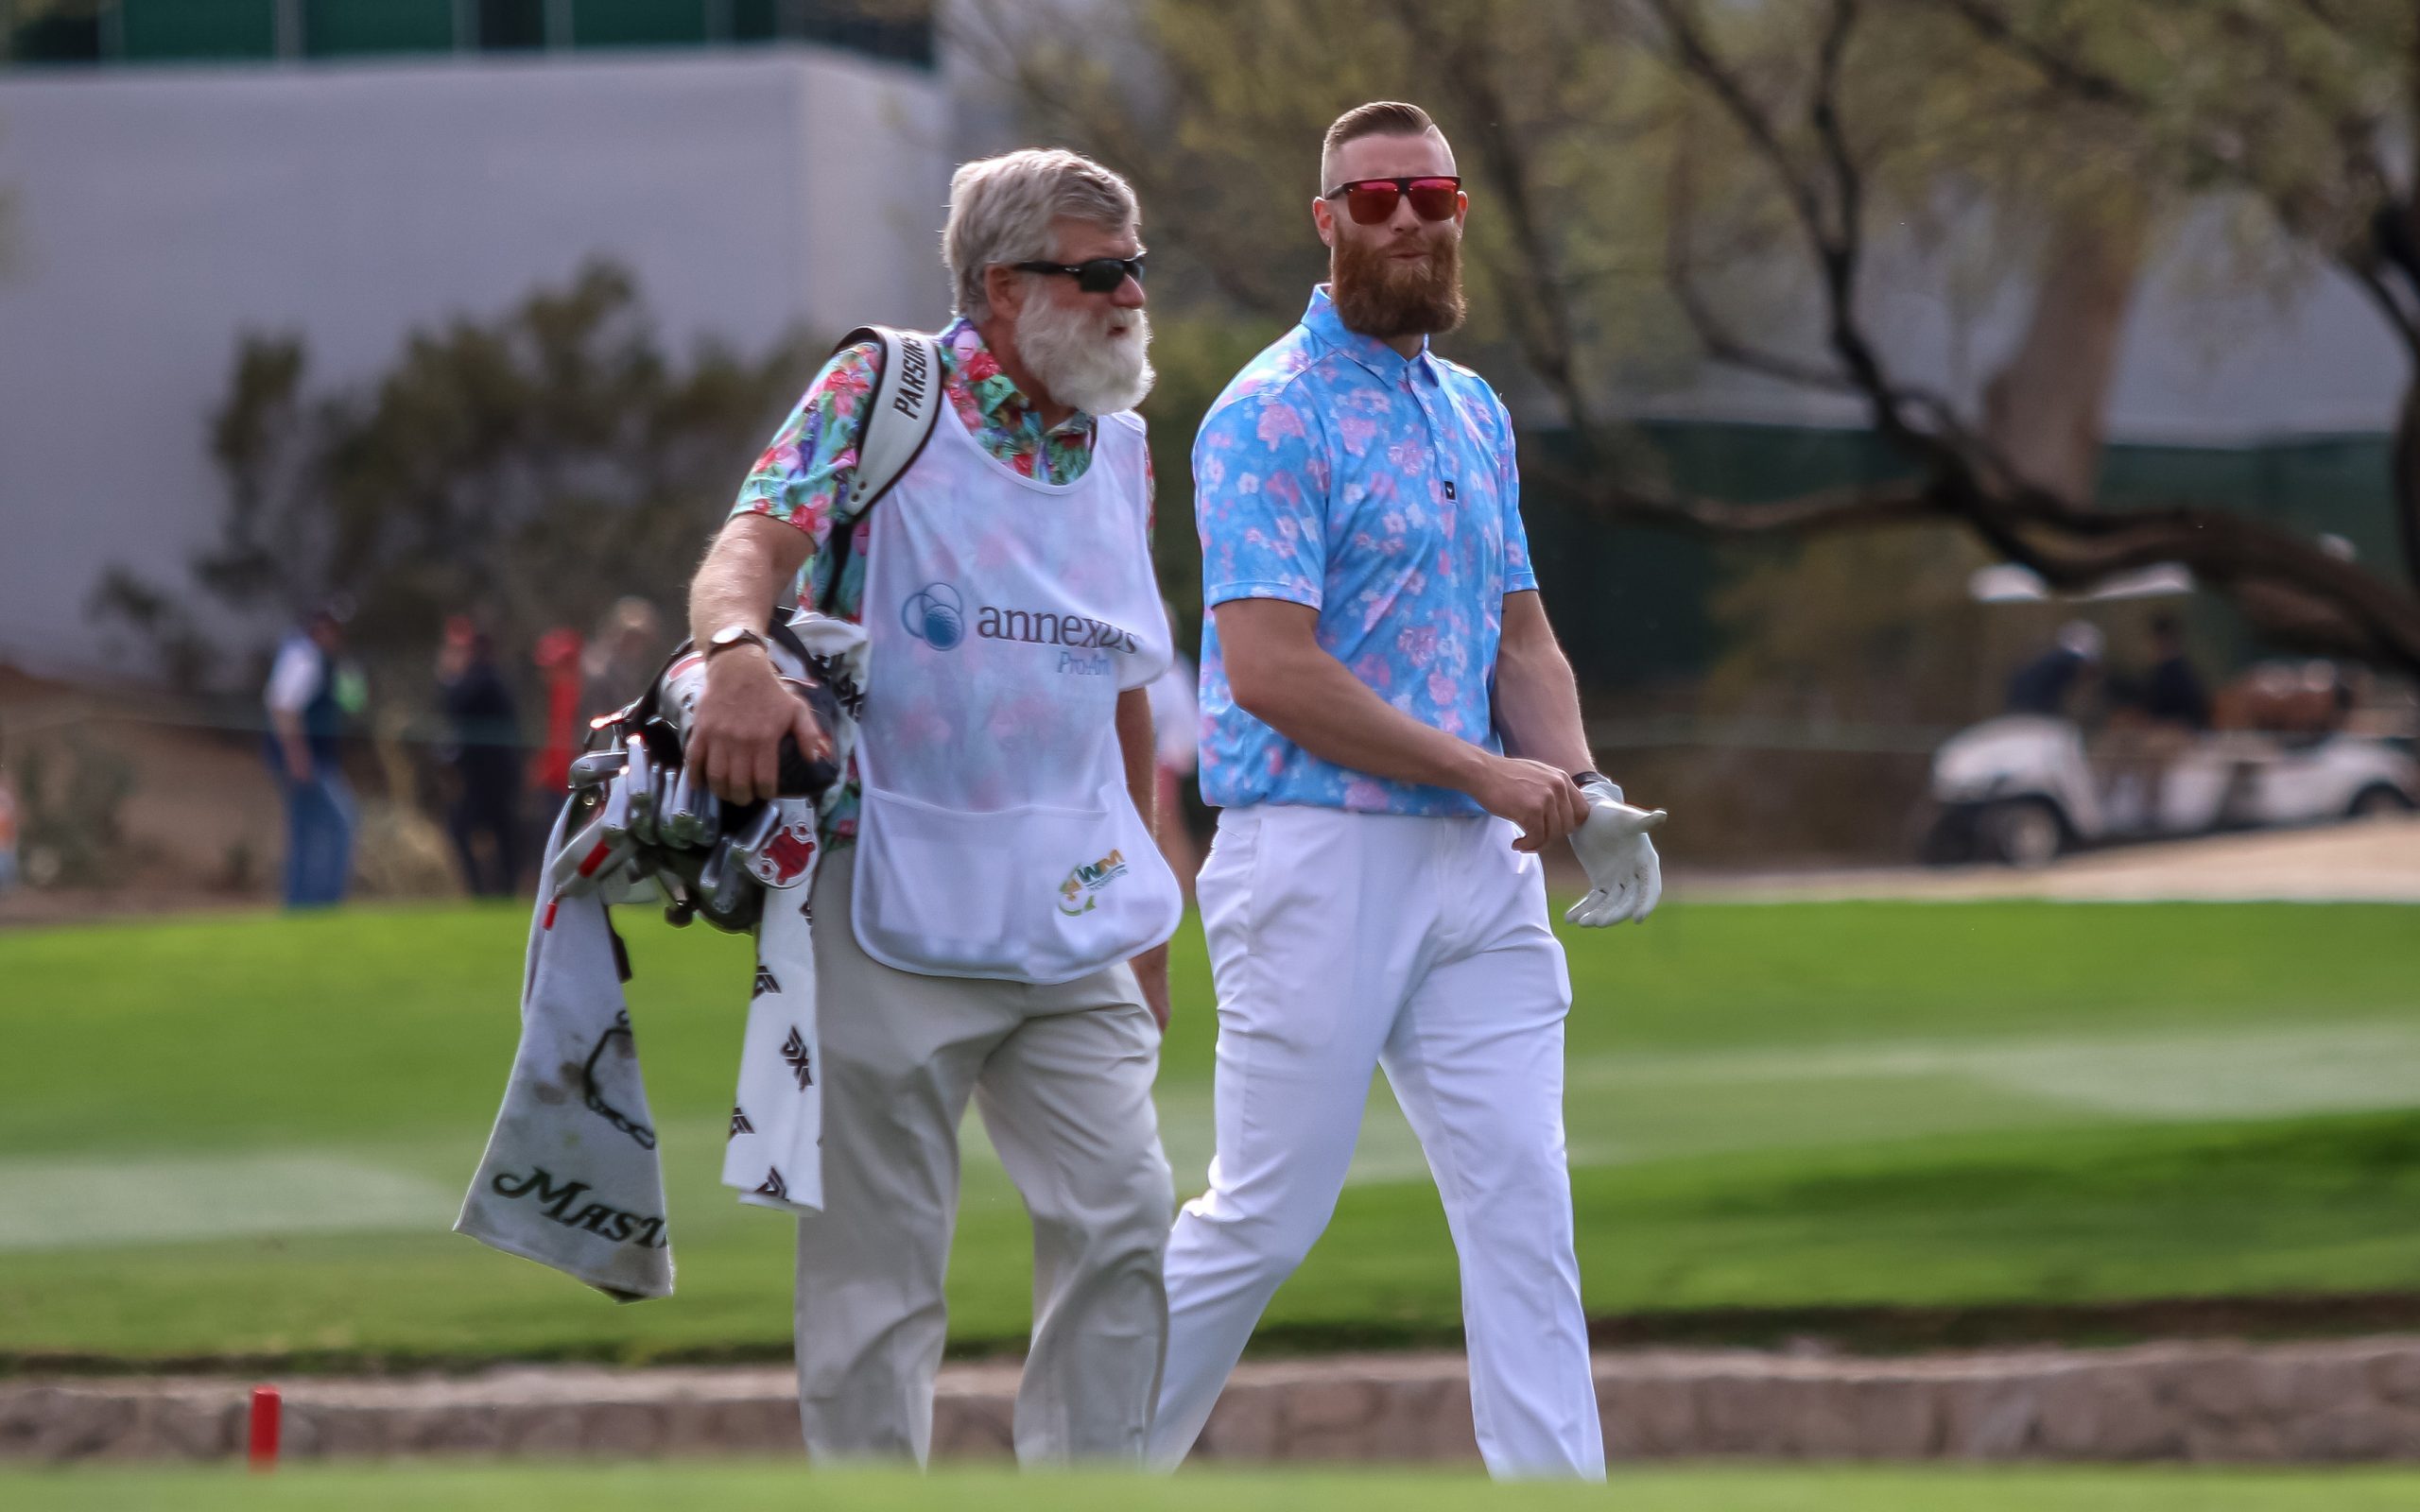 Phoenix Open Day 4: Thomas gains respect, Bradley loses clubs